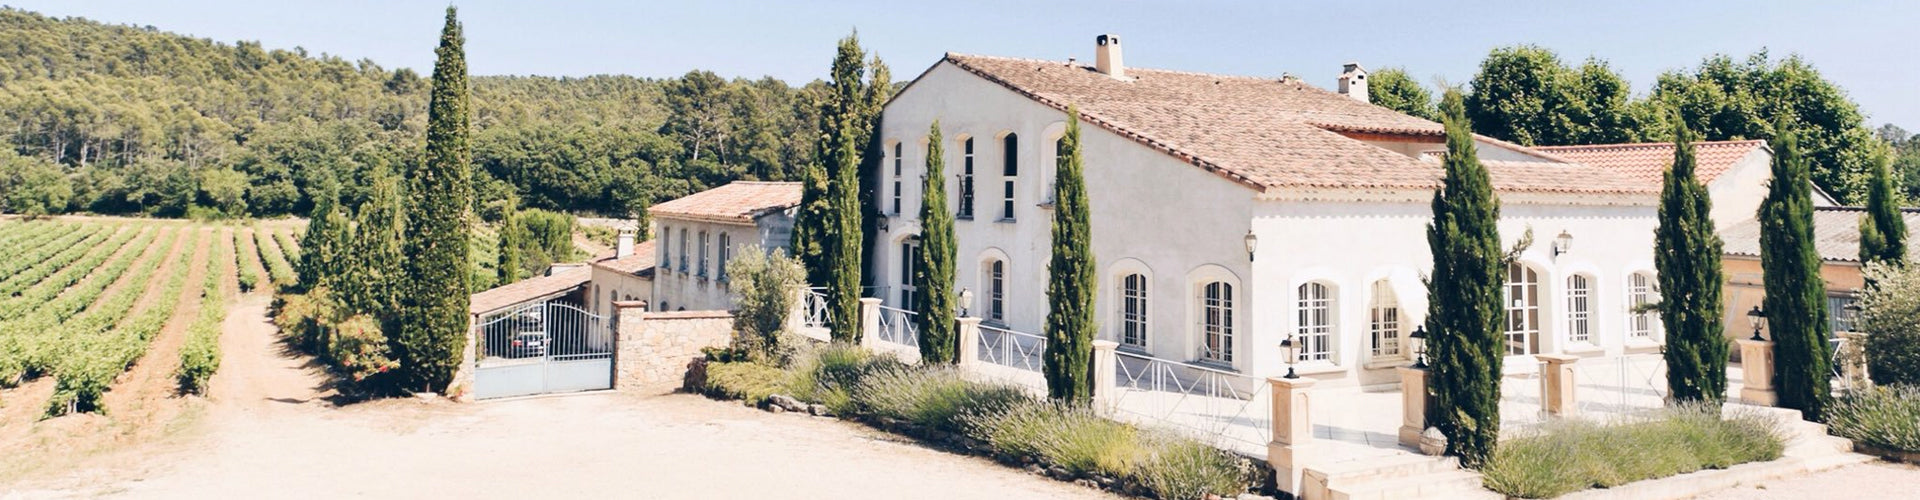 The Domaine du Grand Cros property in Provence